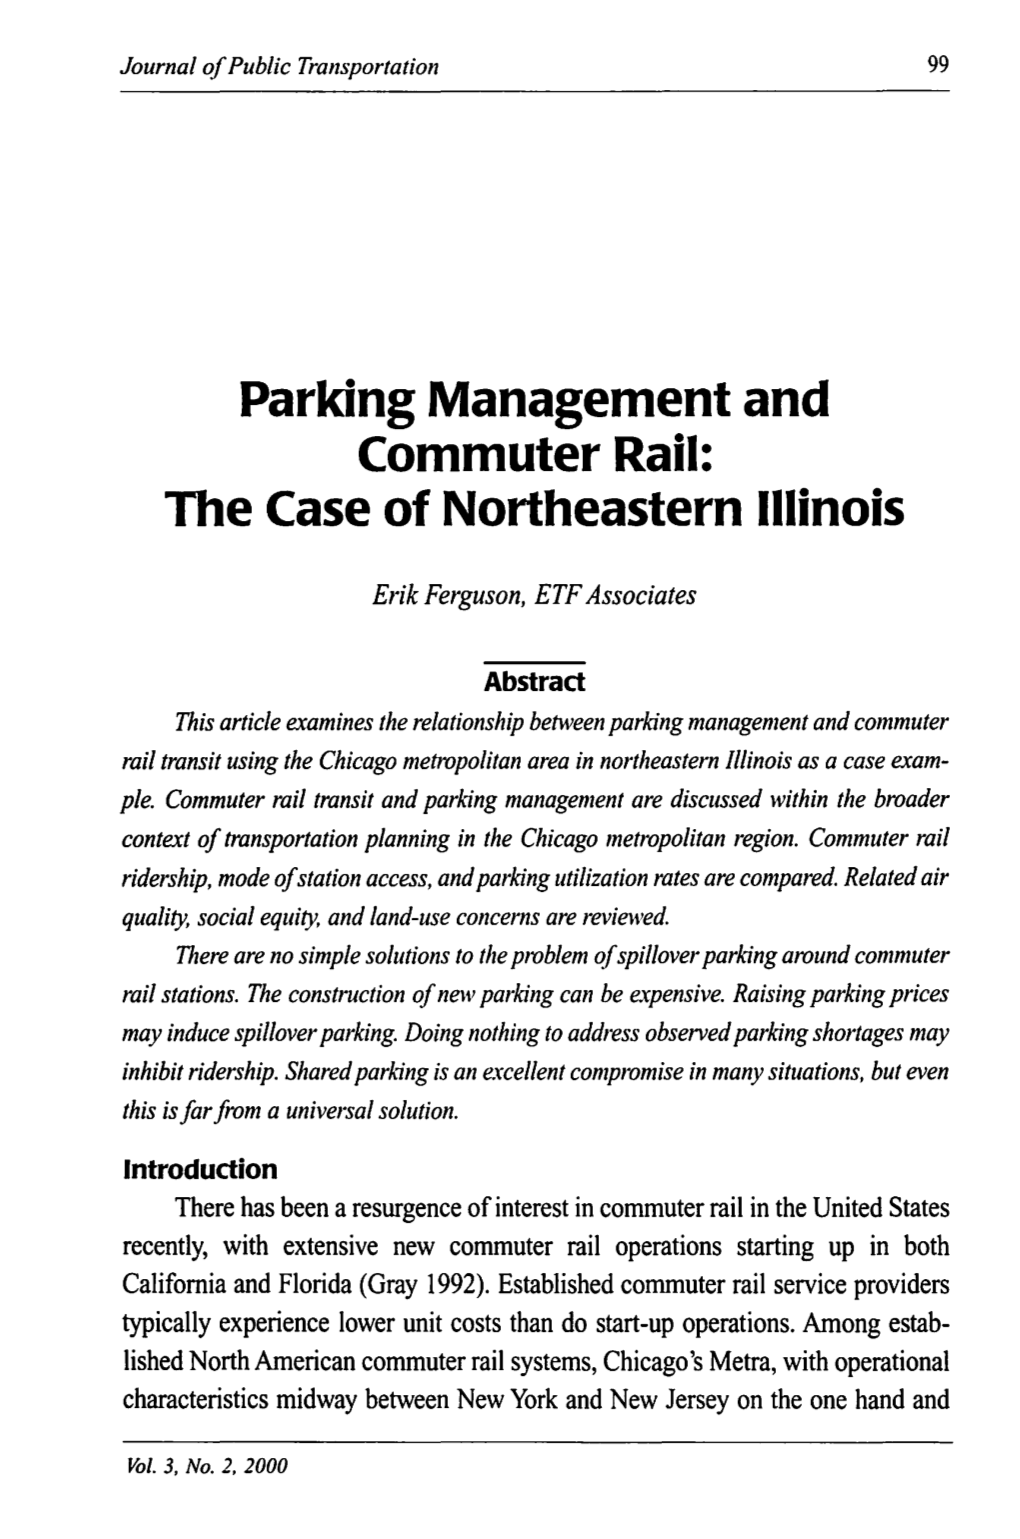 Parking Management and Commuter Rail: the Case of Northeastern Illinois